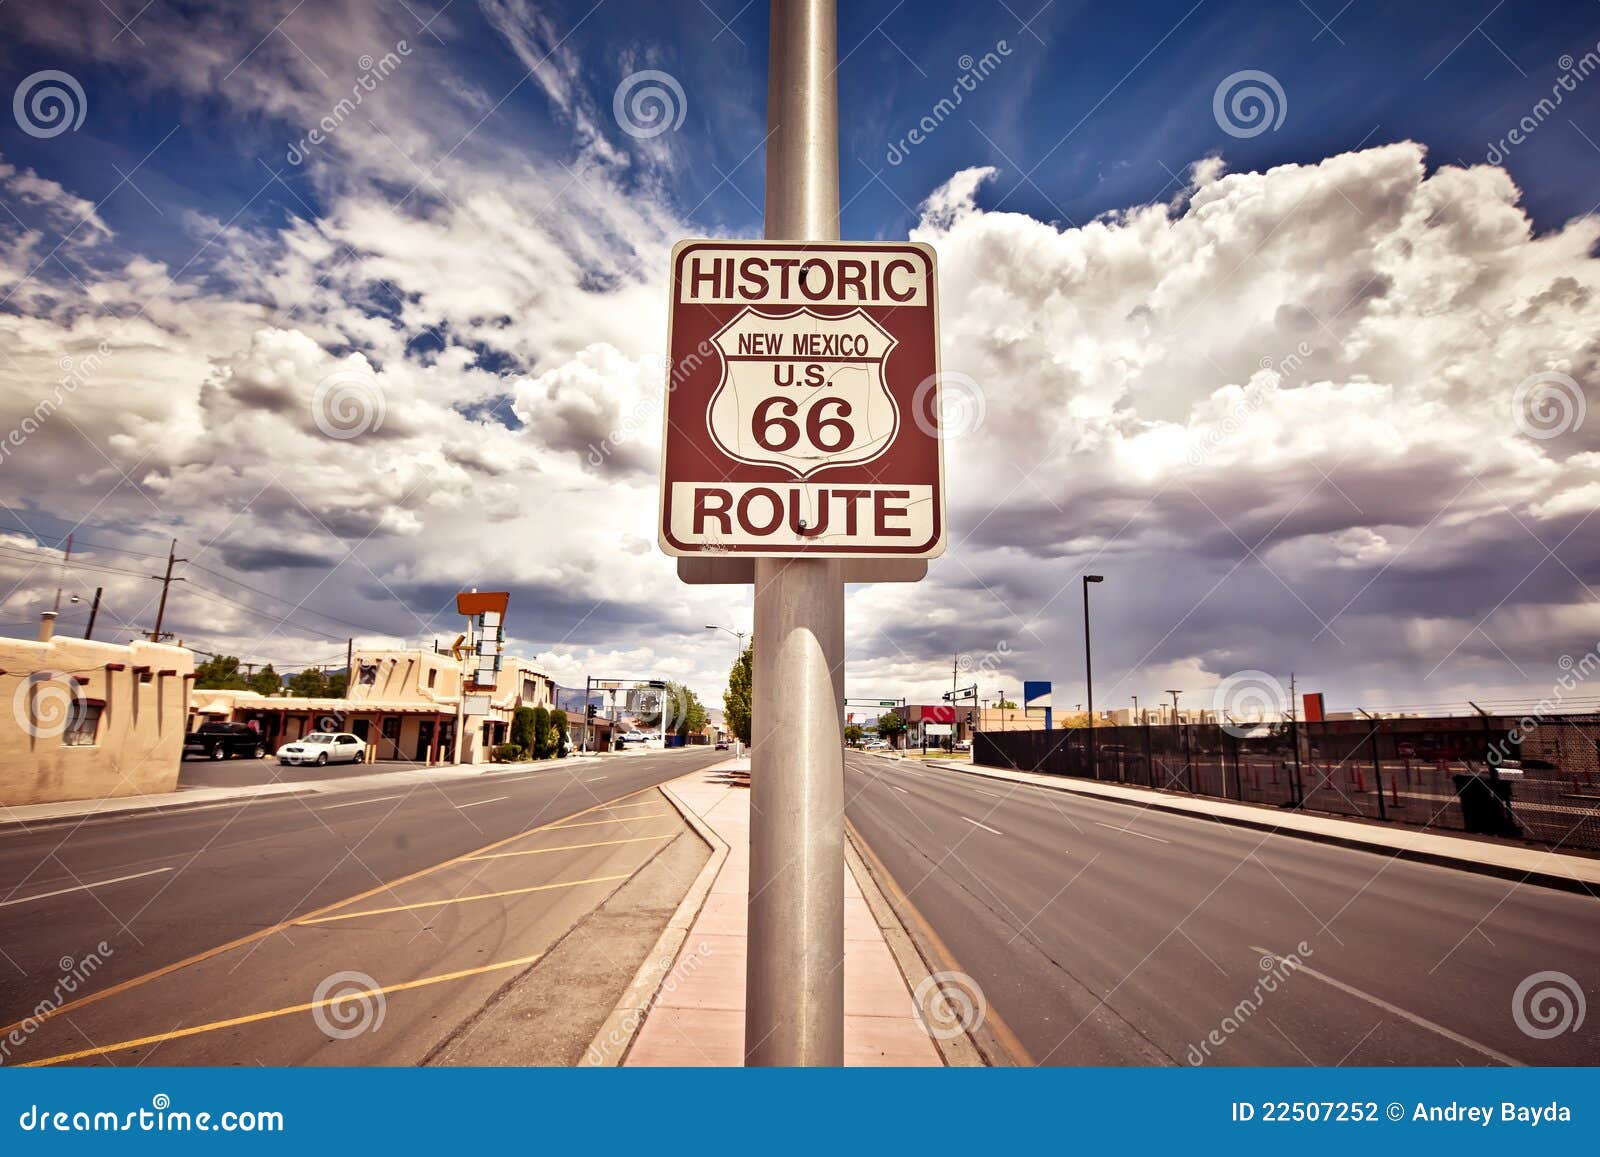 historic route 66 route sign